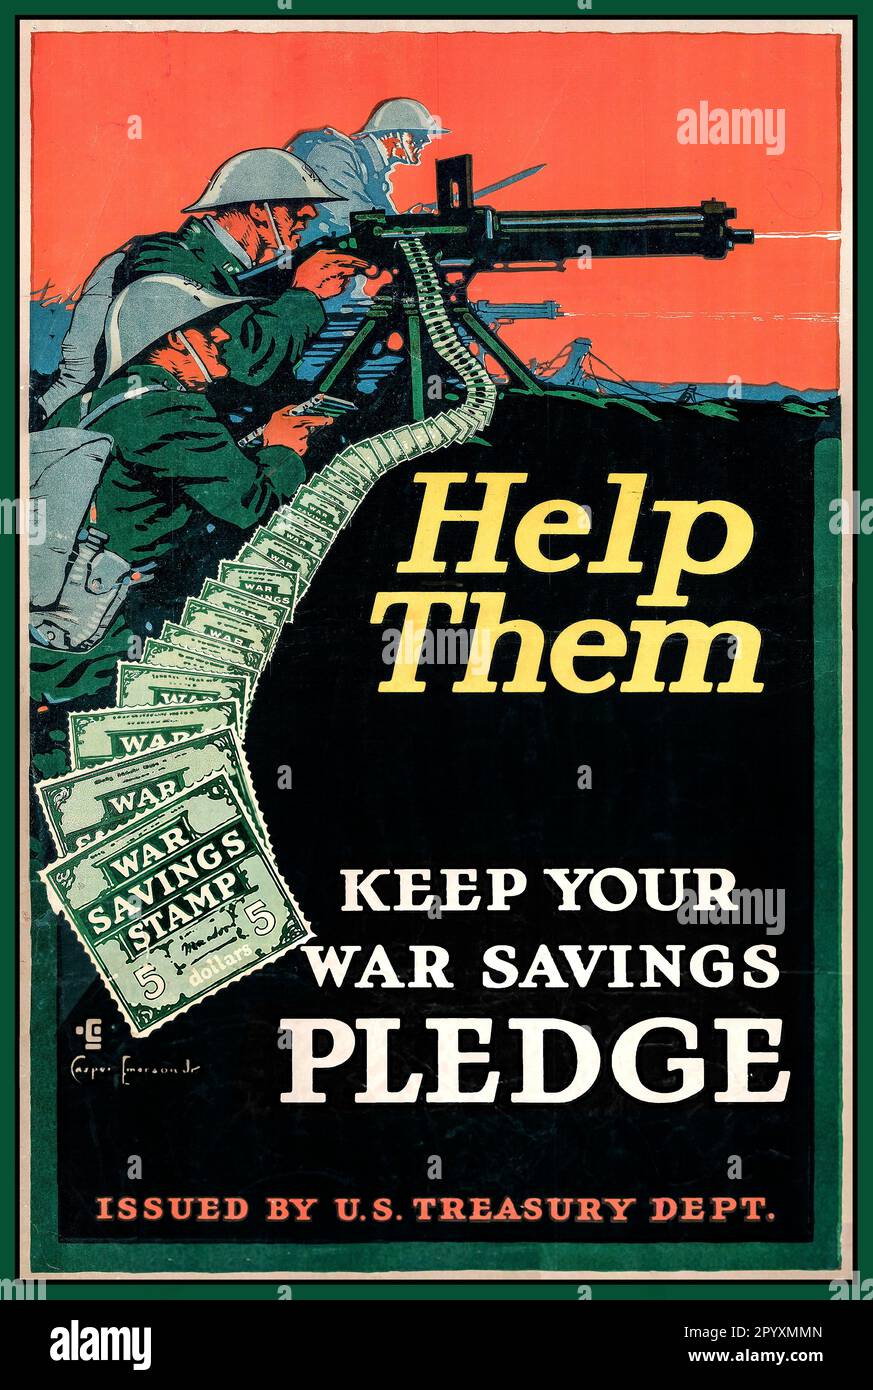 World War I Poster 'HELP THEM ' 'keep your war savings pledge'  for War Savings Stamps, ca. 1917. Arkansans saved money, food and supplies for the troops during World War I. First World War The Great War USA Dollar War Savings Stamps Artist Casper Emerson Jnr Stock Photo